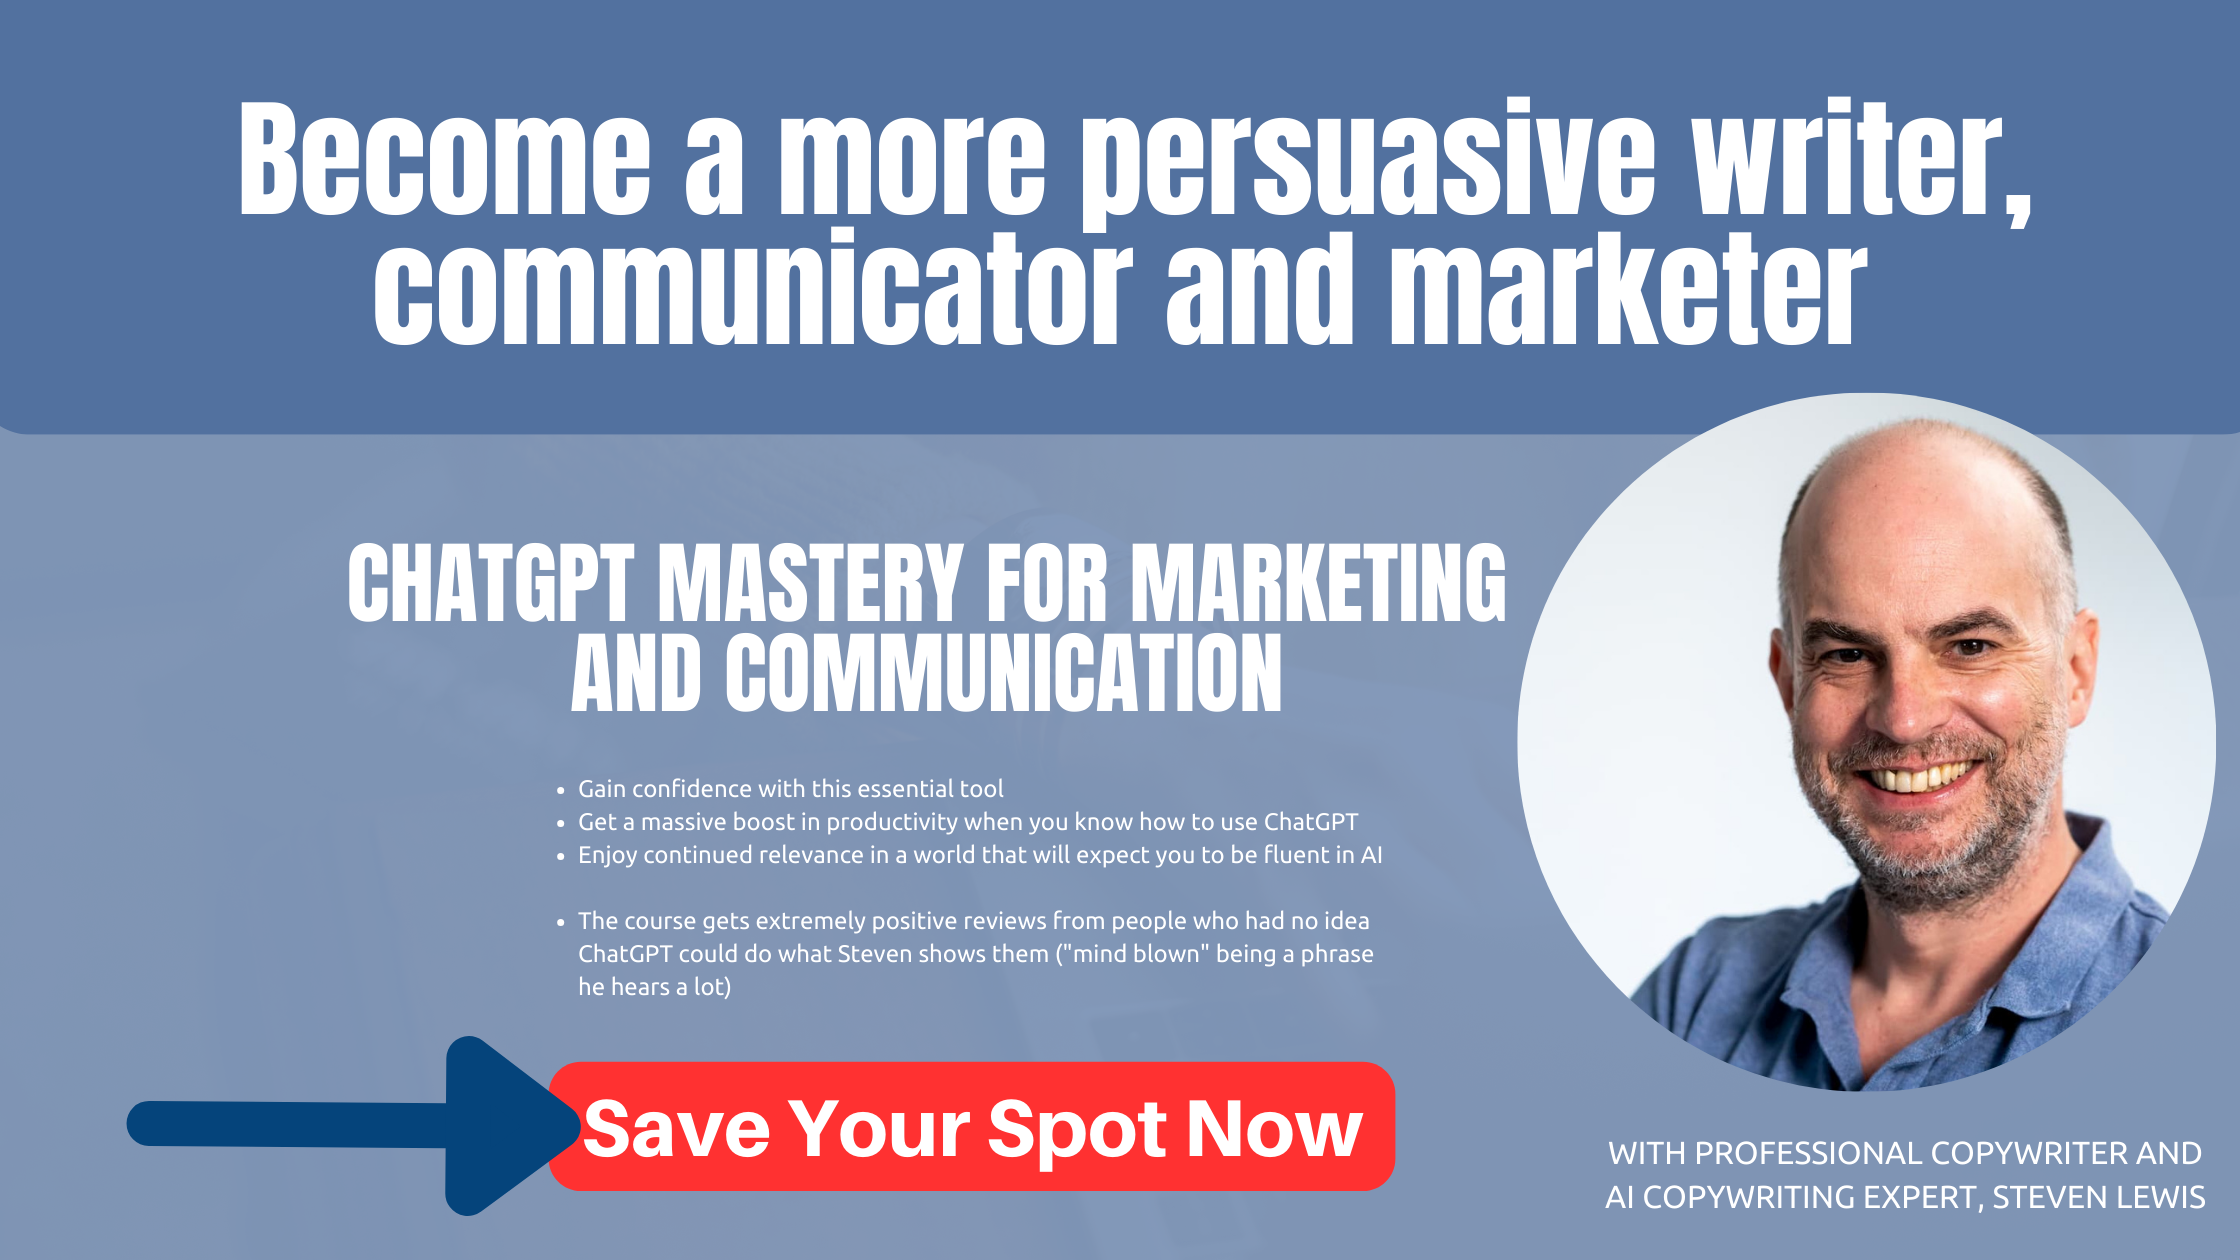 Image says "become a more persuasive writer, communicator and marketer."